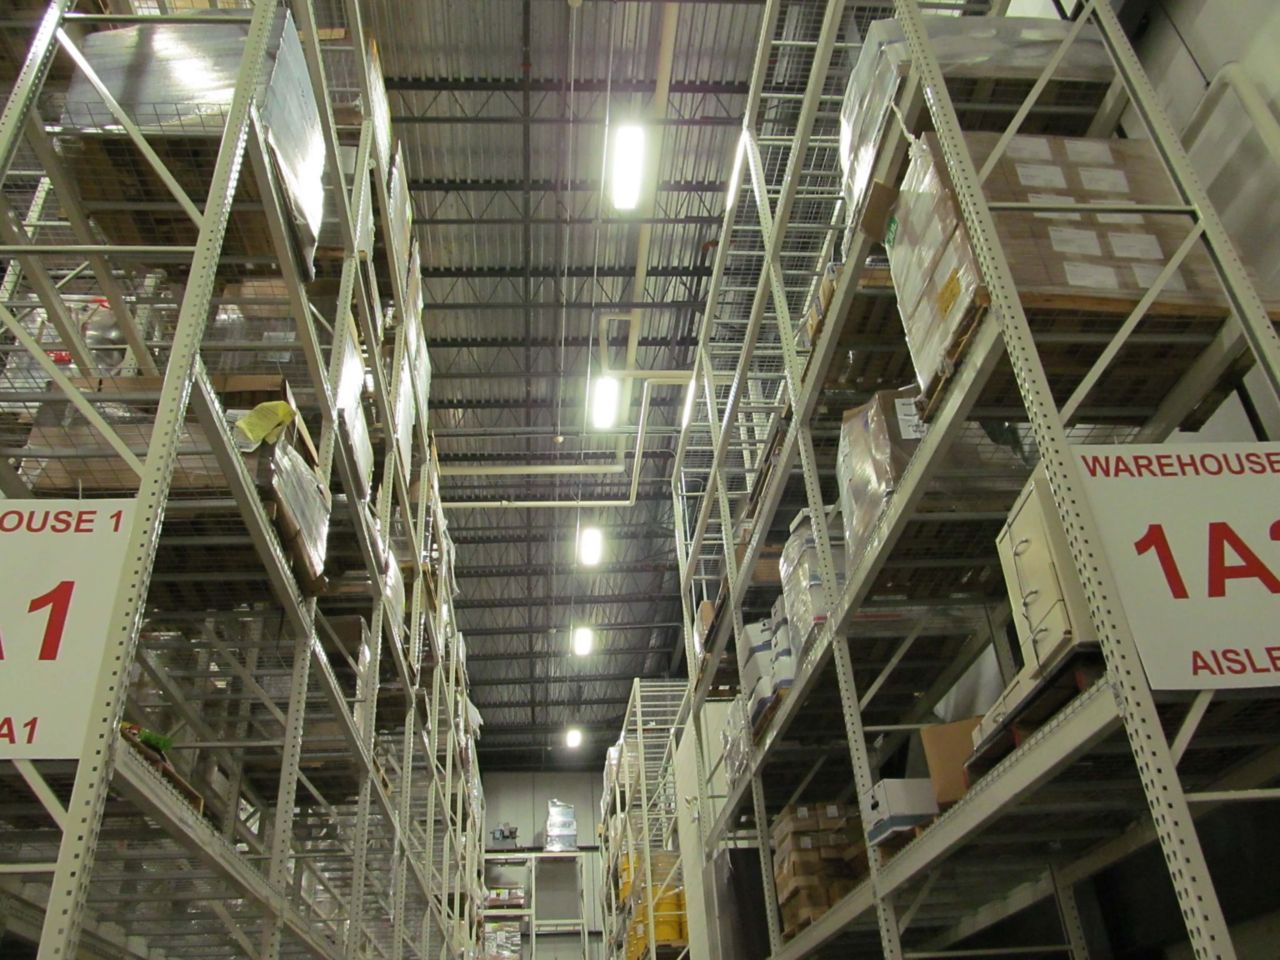 Large metal warehouse shelves forming an isle in a warehouse